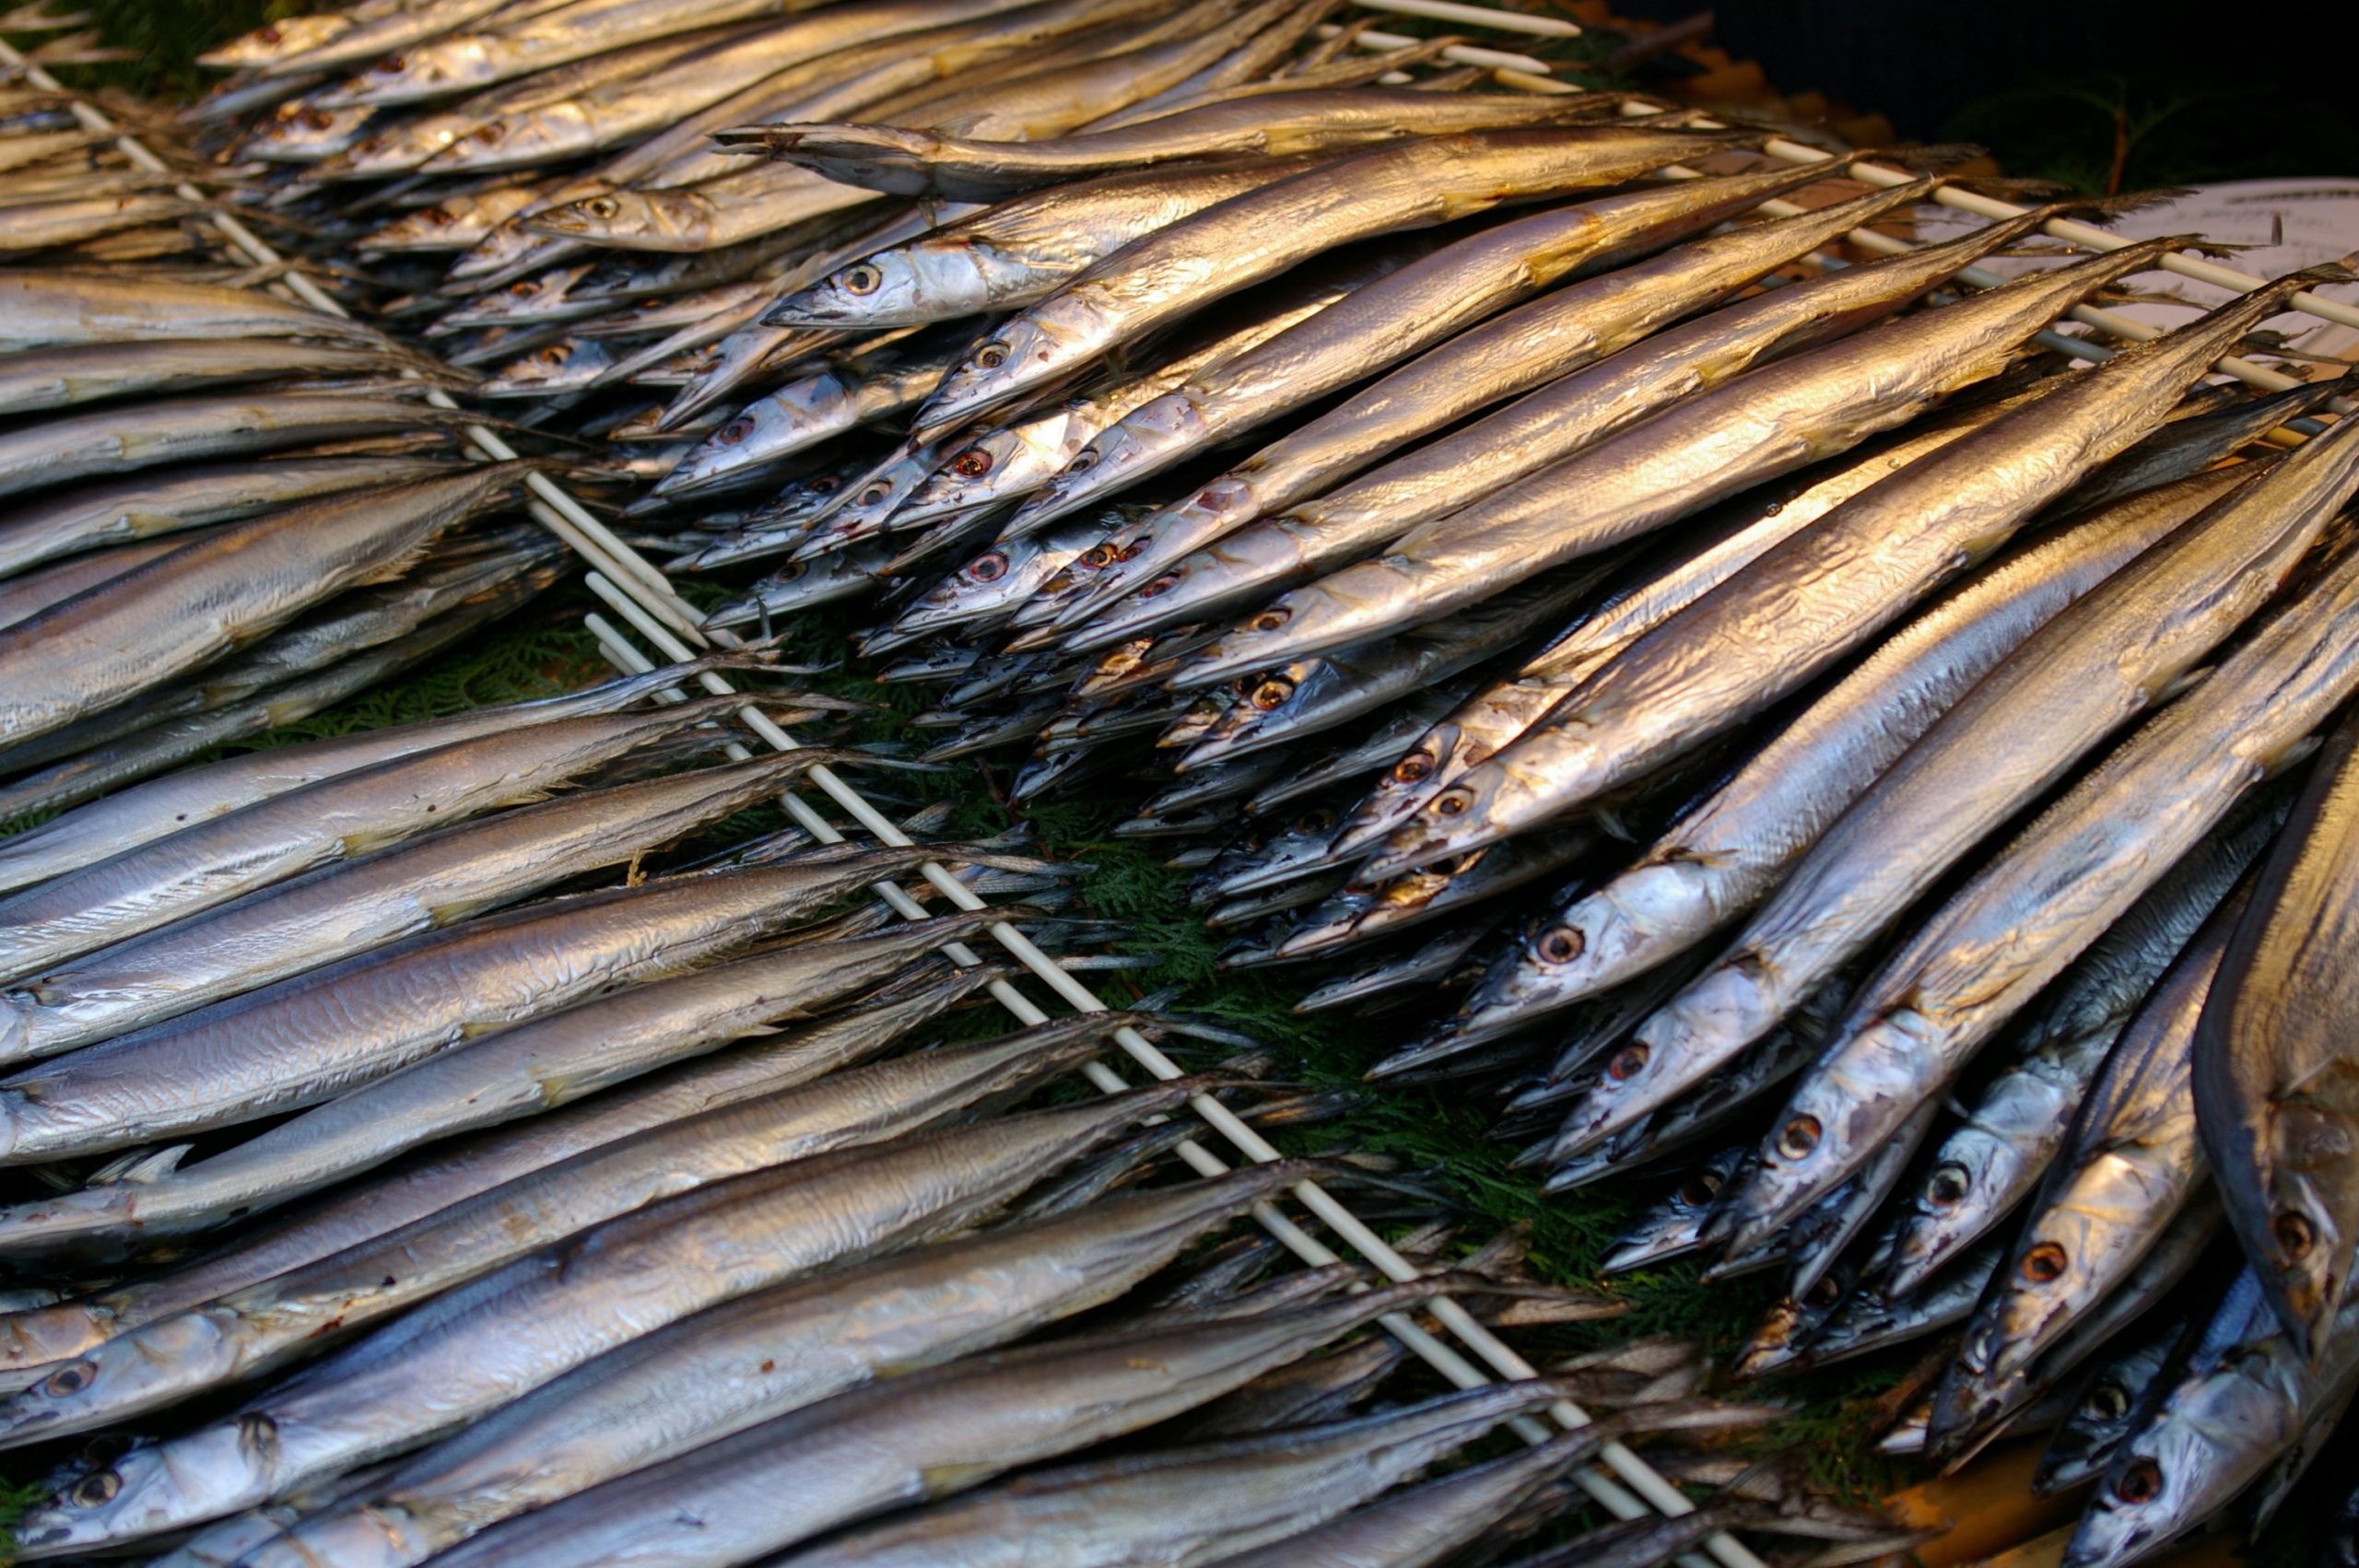 A path to sustainability emerges for Pacific saury